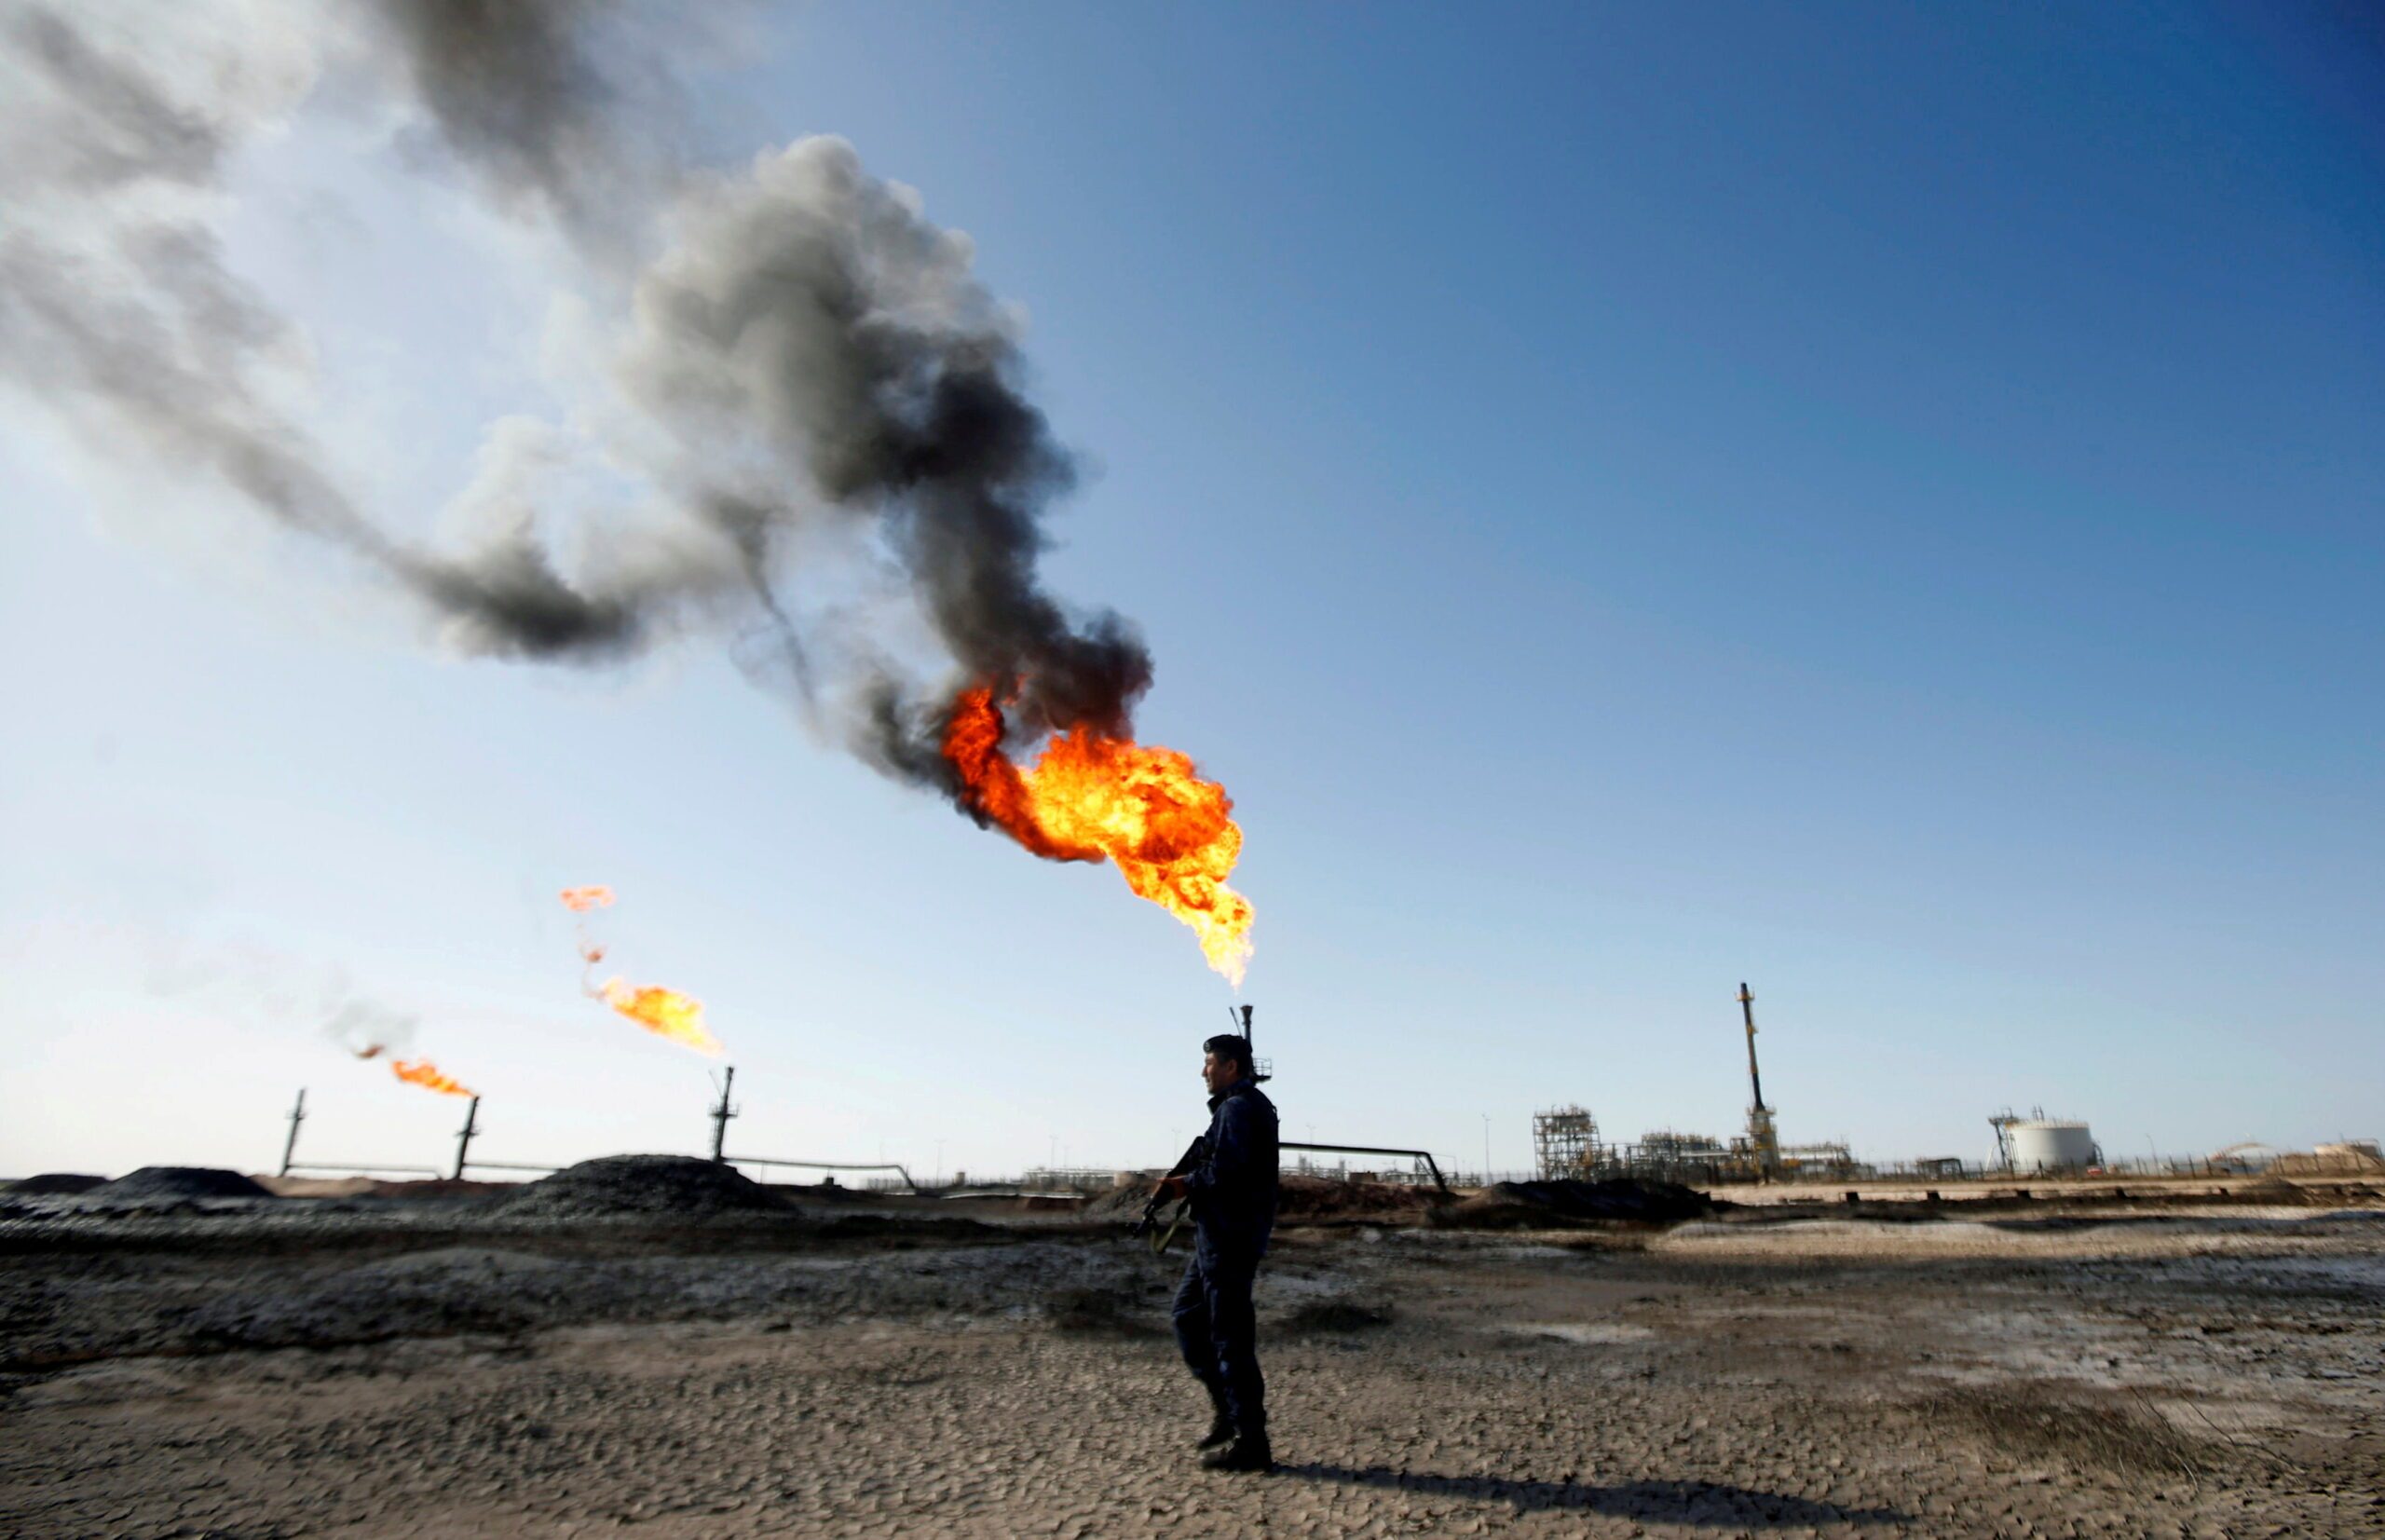 West Qurna-1 oil field. ExxonMobil is in talks to sell its remaining stake in the site near Basra. Picture: Reuters/Essam al-Sudani